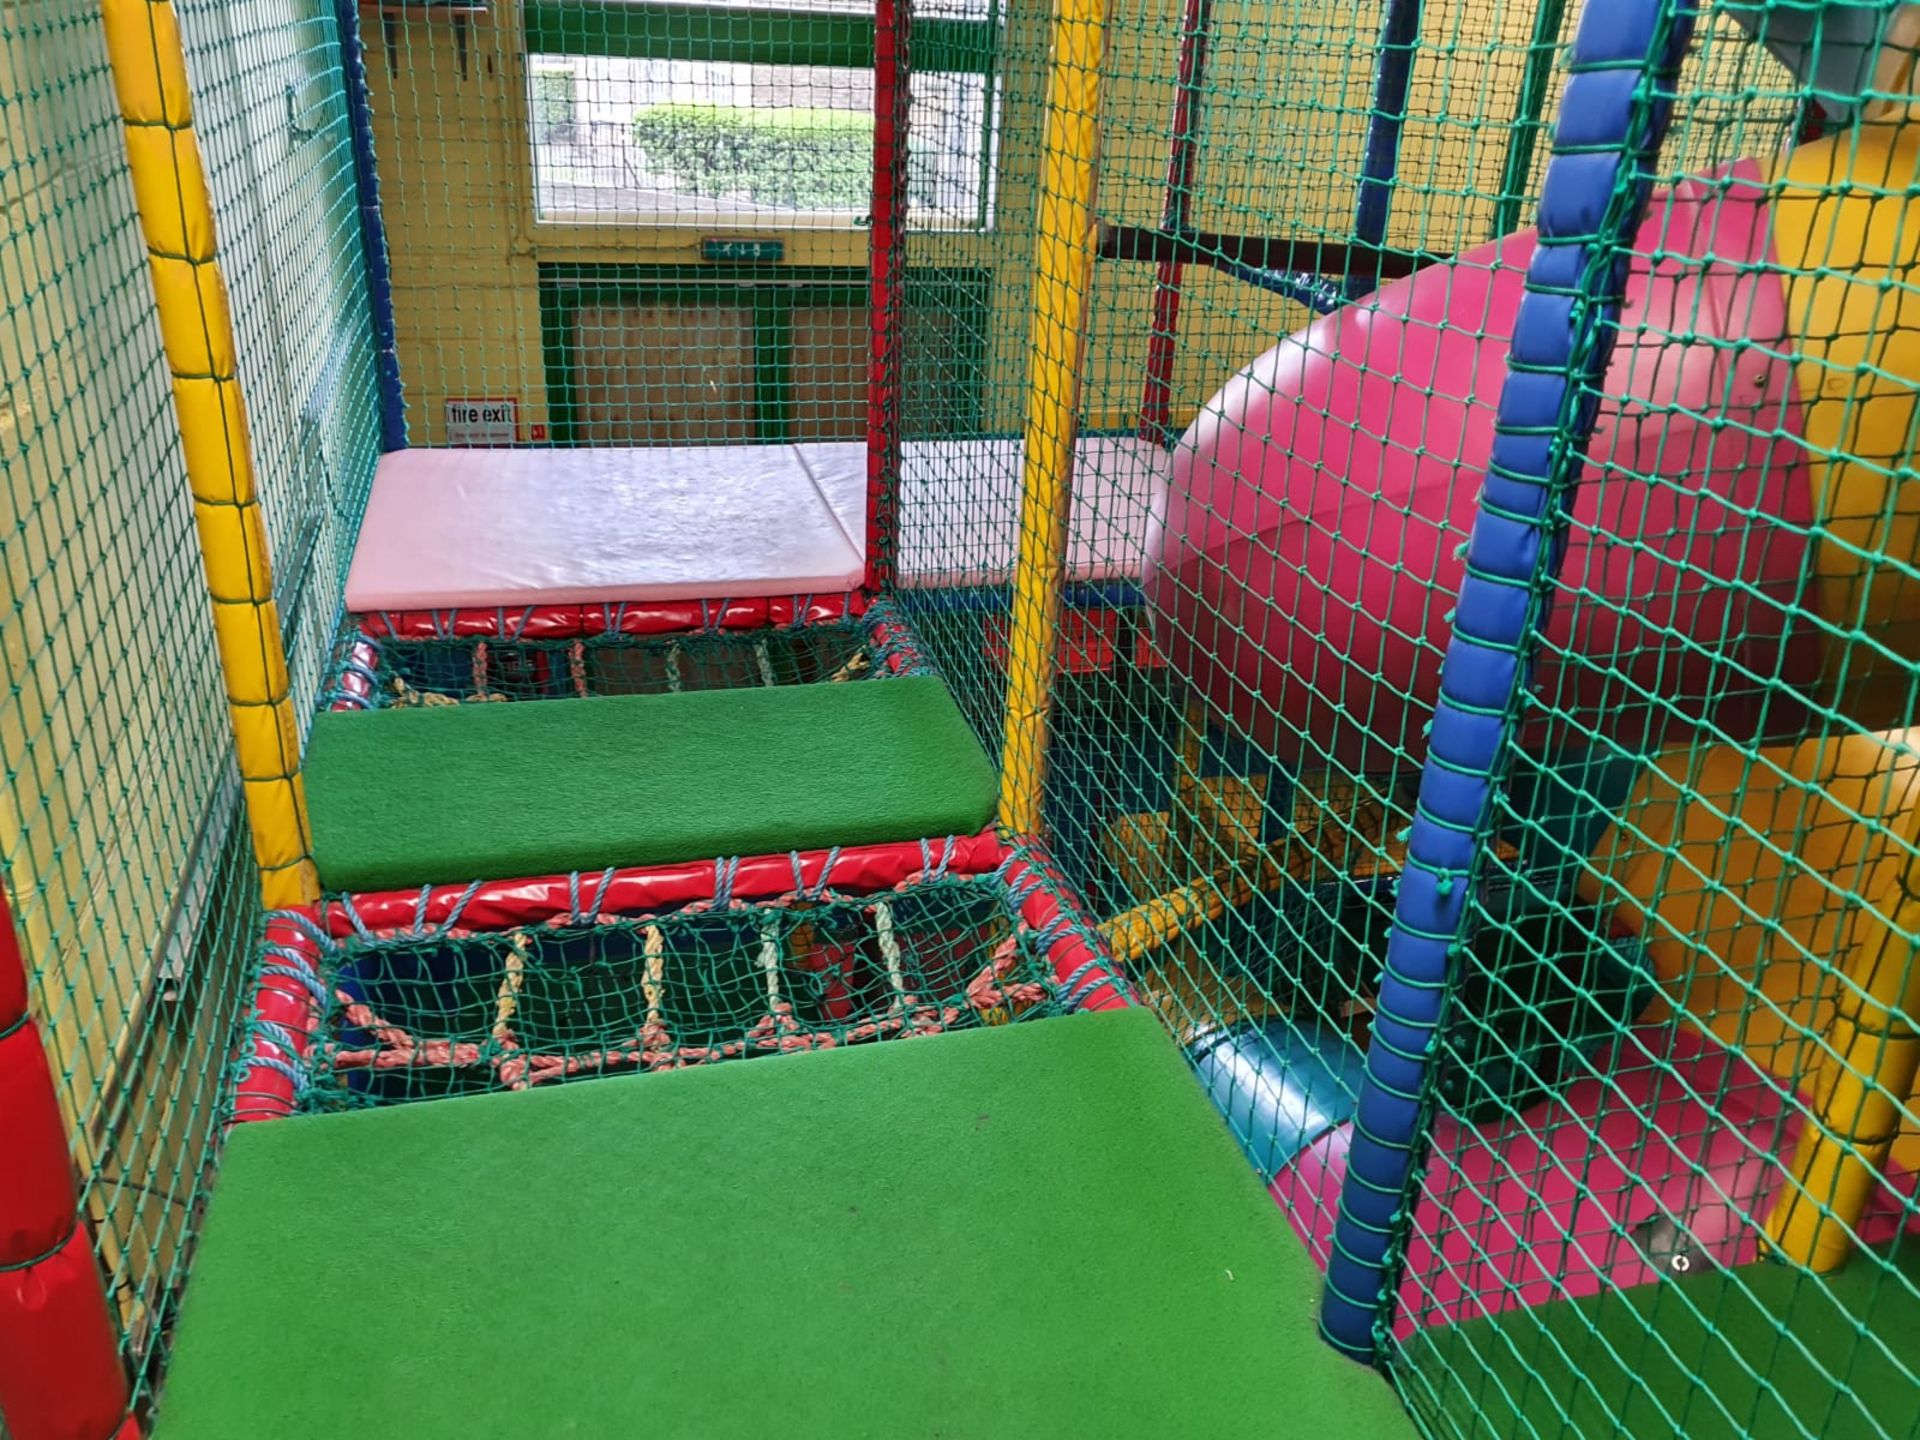 Bramleys Big Adventure Playground - Giant Action-Packed Playcentre With Slides, Zip Line Swings, - Image 16 of 99